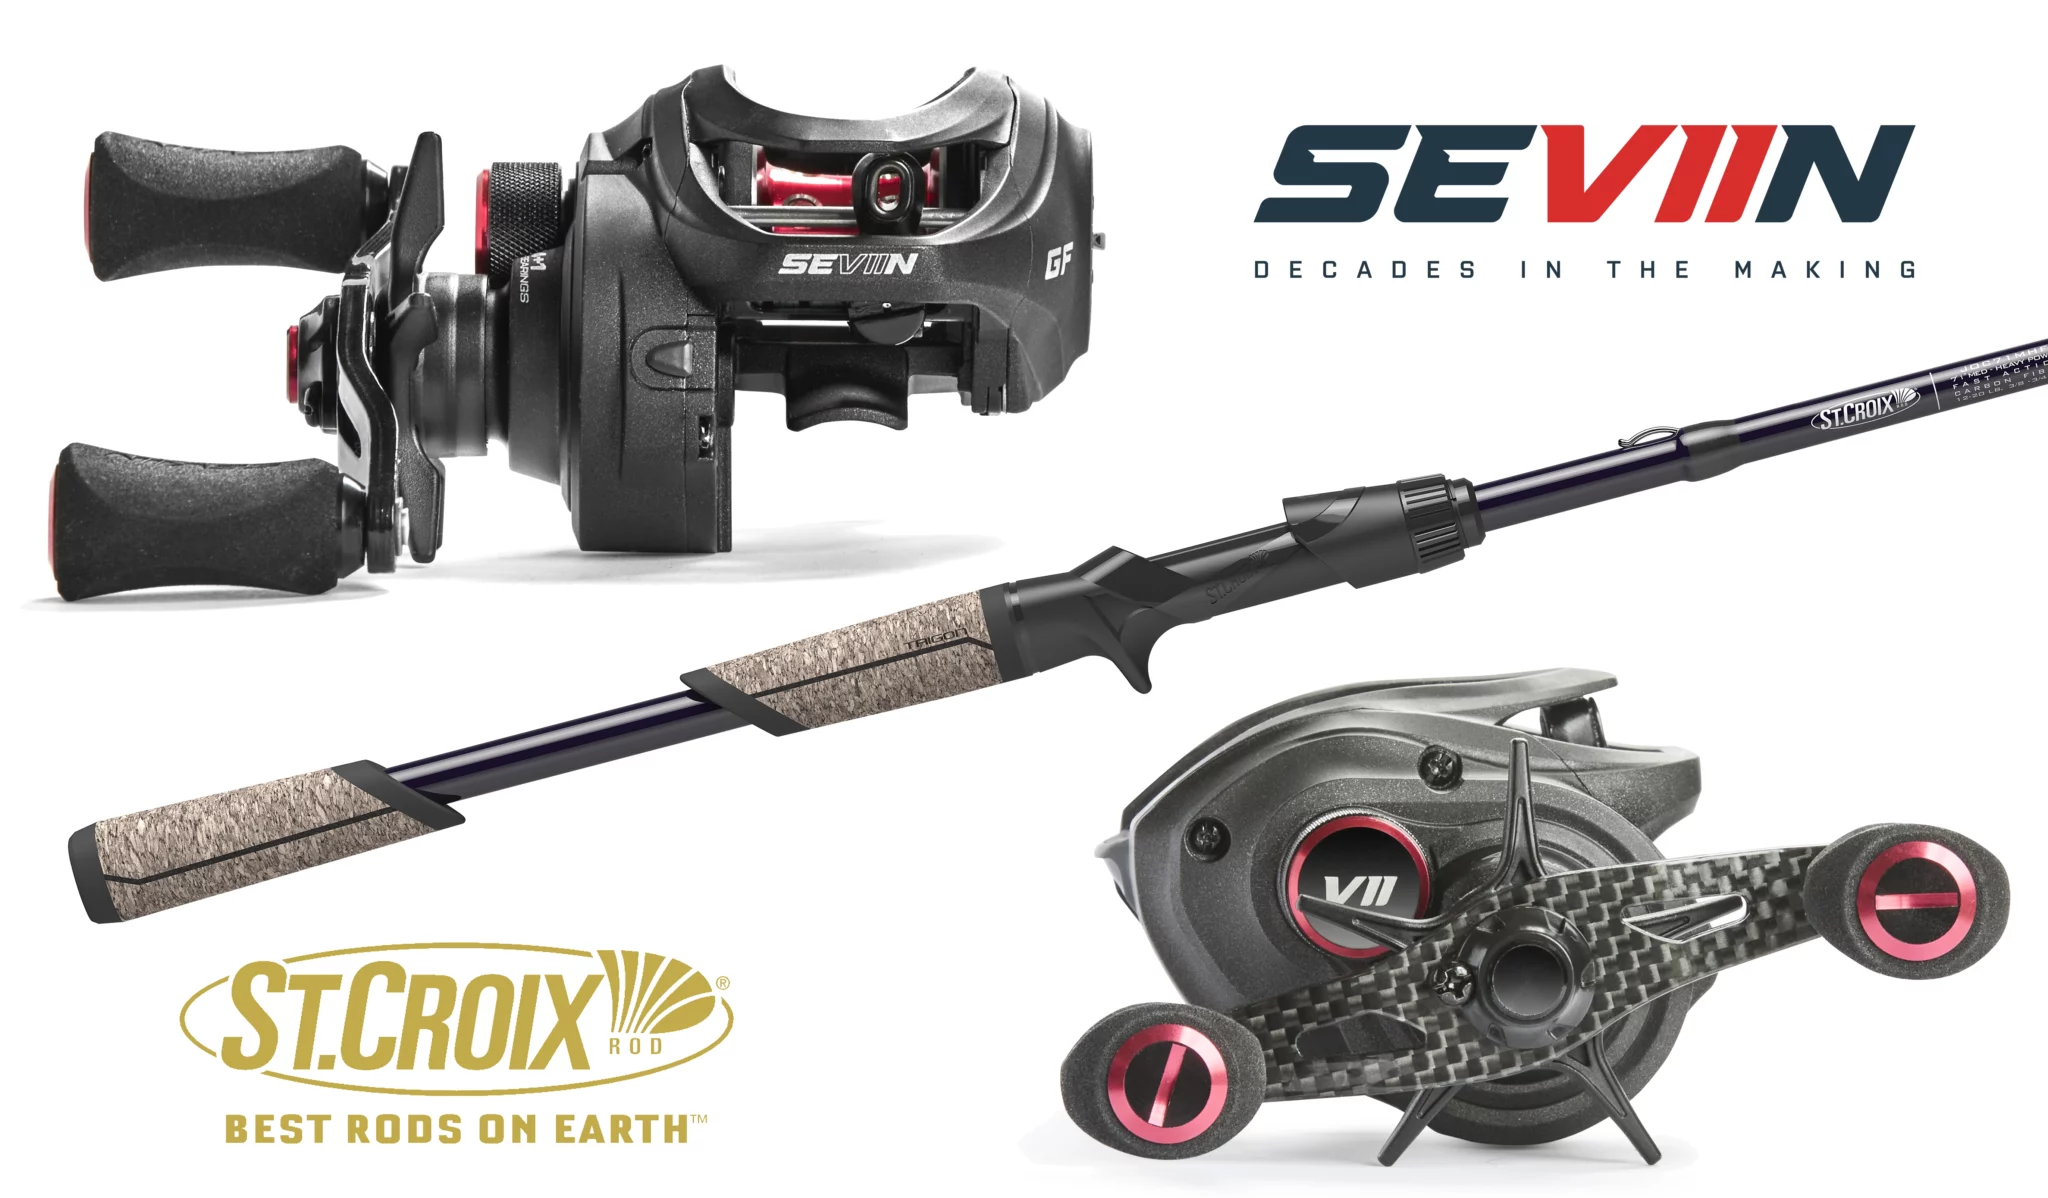 St. Croix Rods and New Seviin Reel Giveaway Winners - Wired2Fish